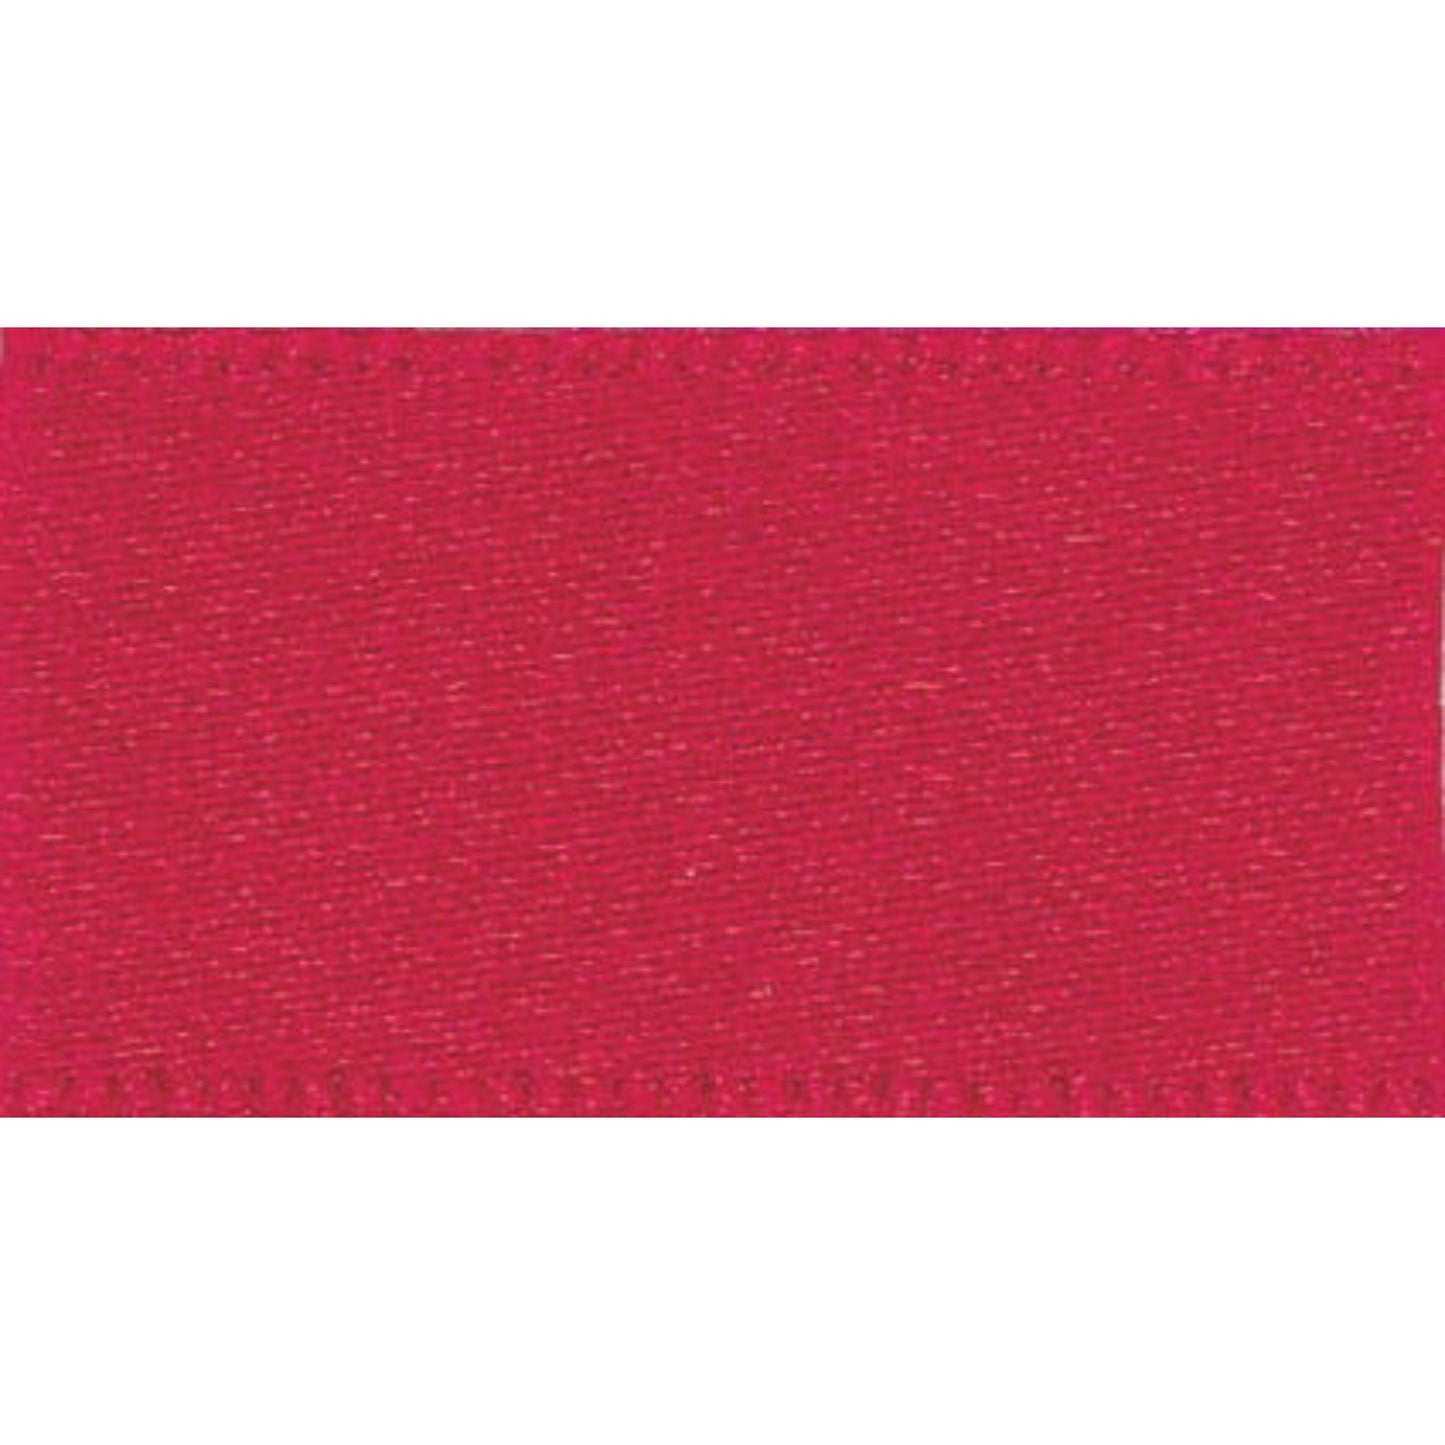 Double Faced Satin Ribbon: Red: 35mm Wide. Price per metre.